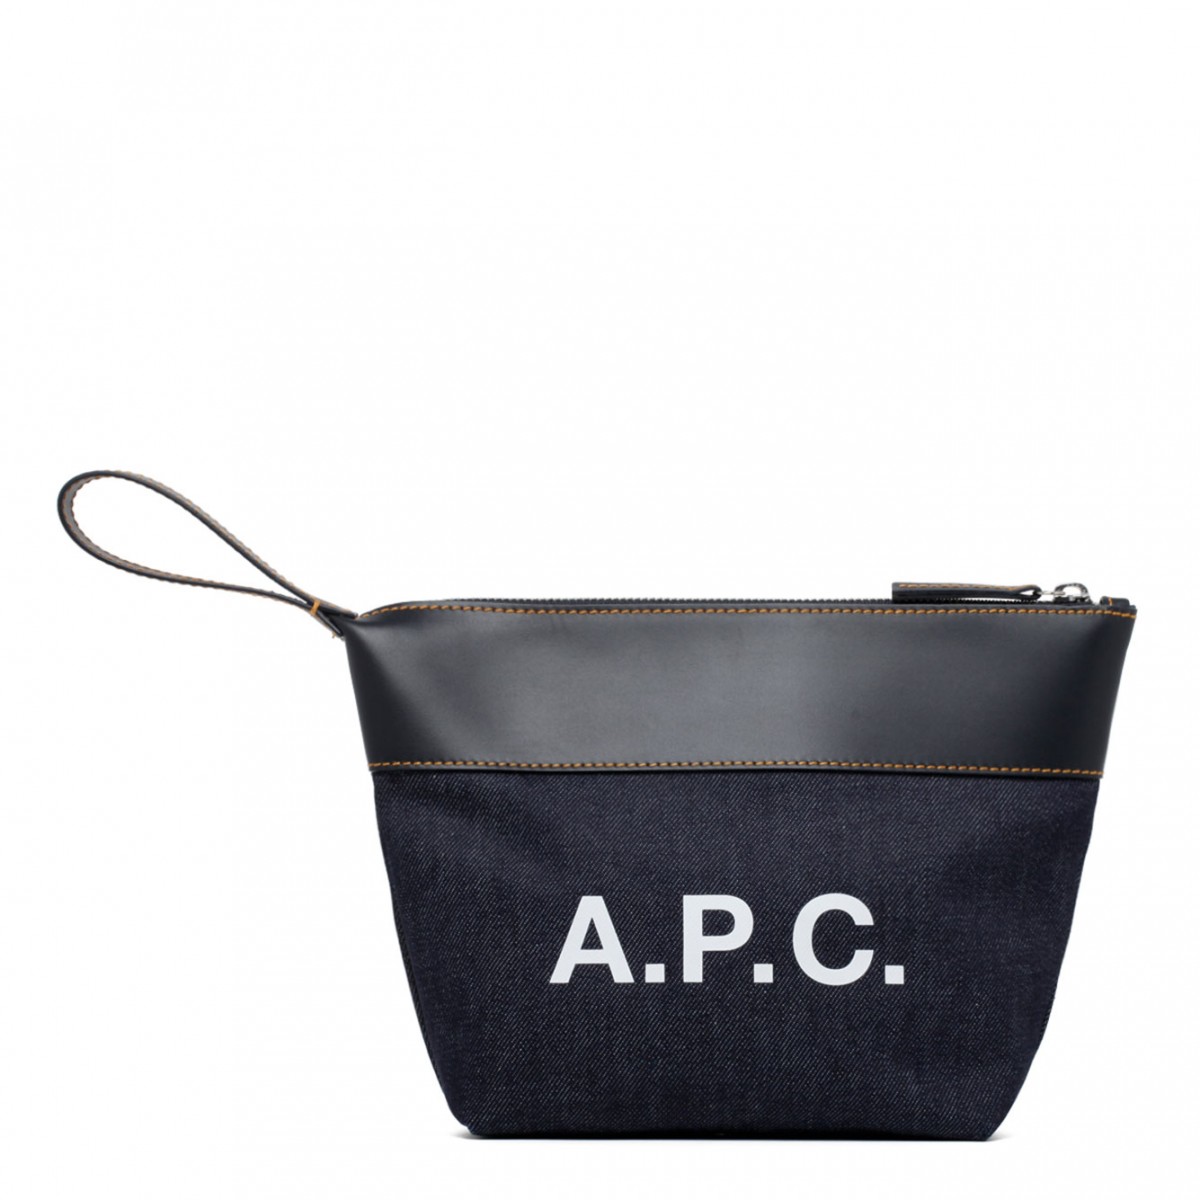 A.P.C. Dark Navy Leather and Cotton Logo Print Clutch Bag